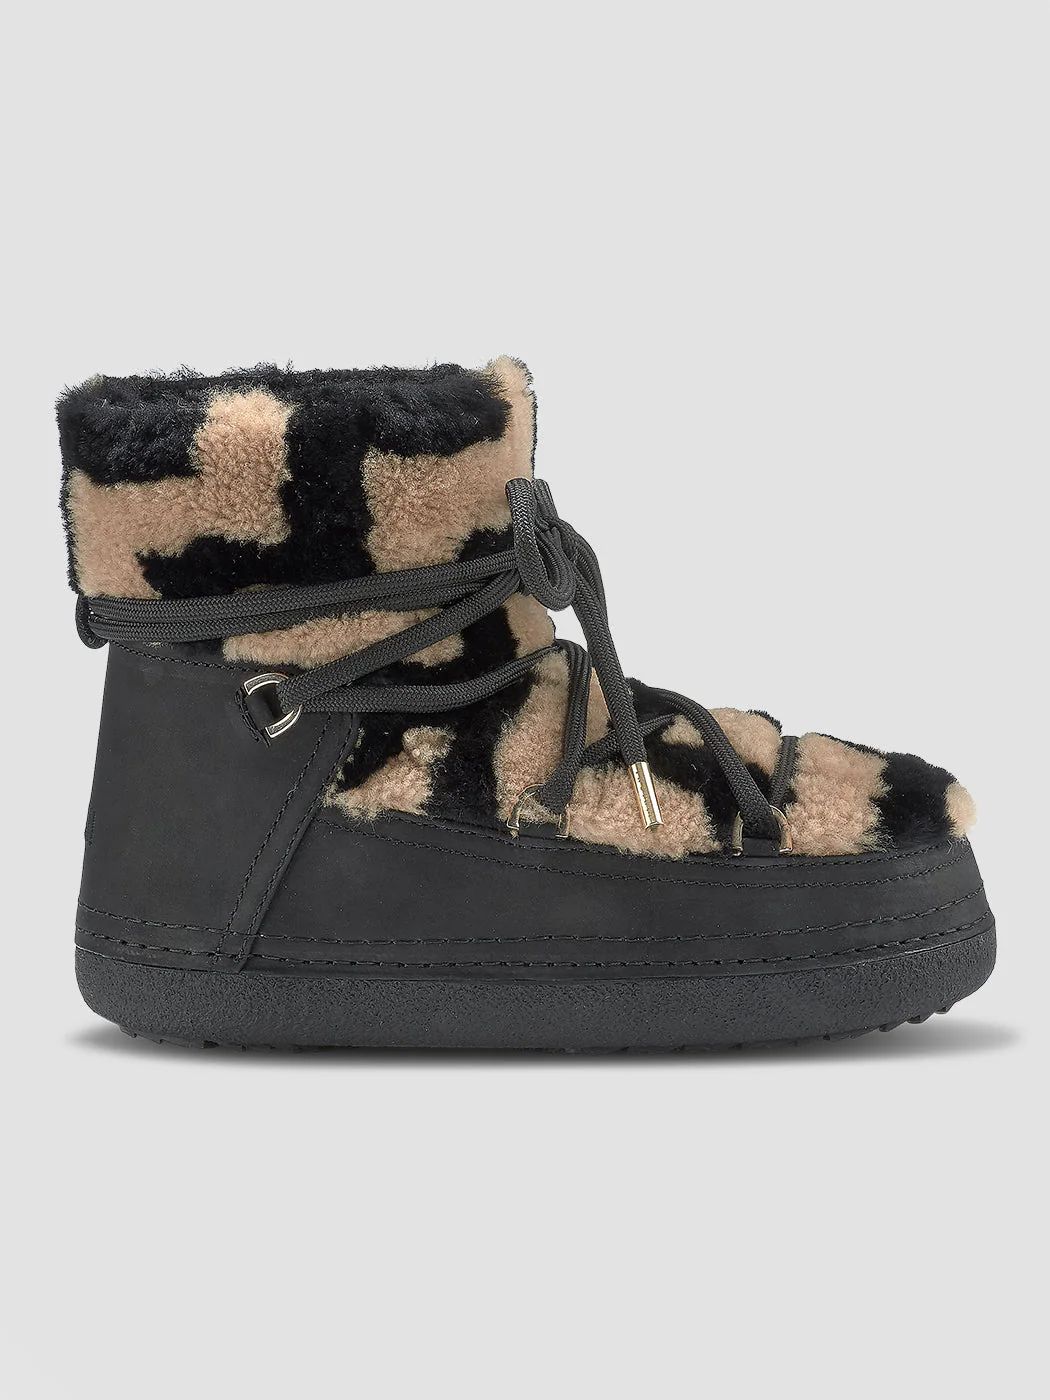 Shearling Zigzag - Brown | Carbon38